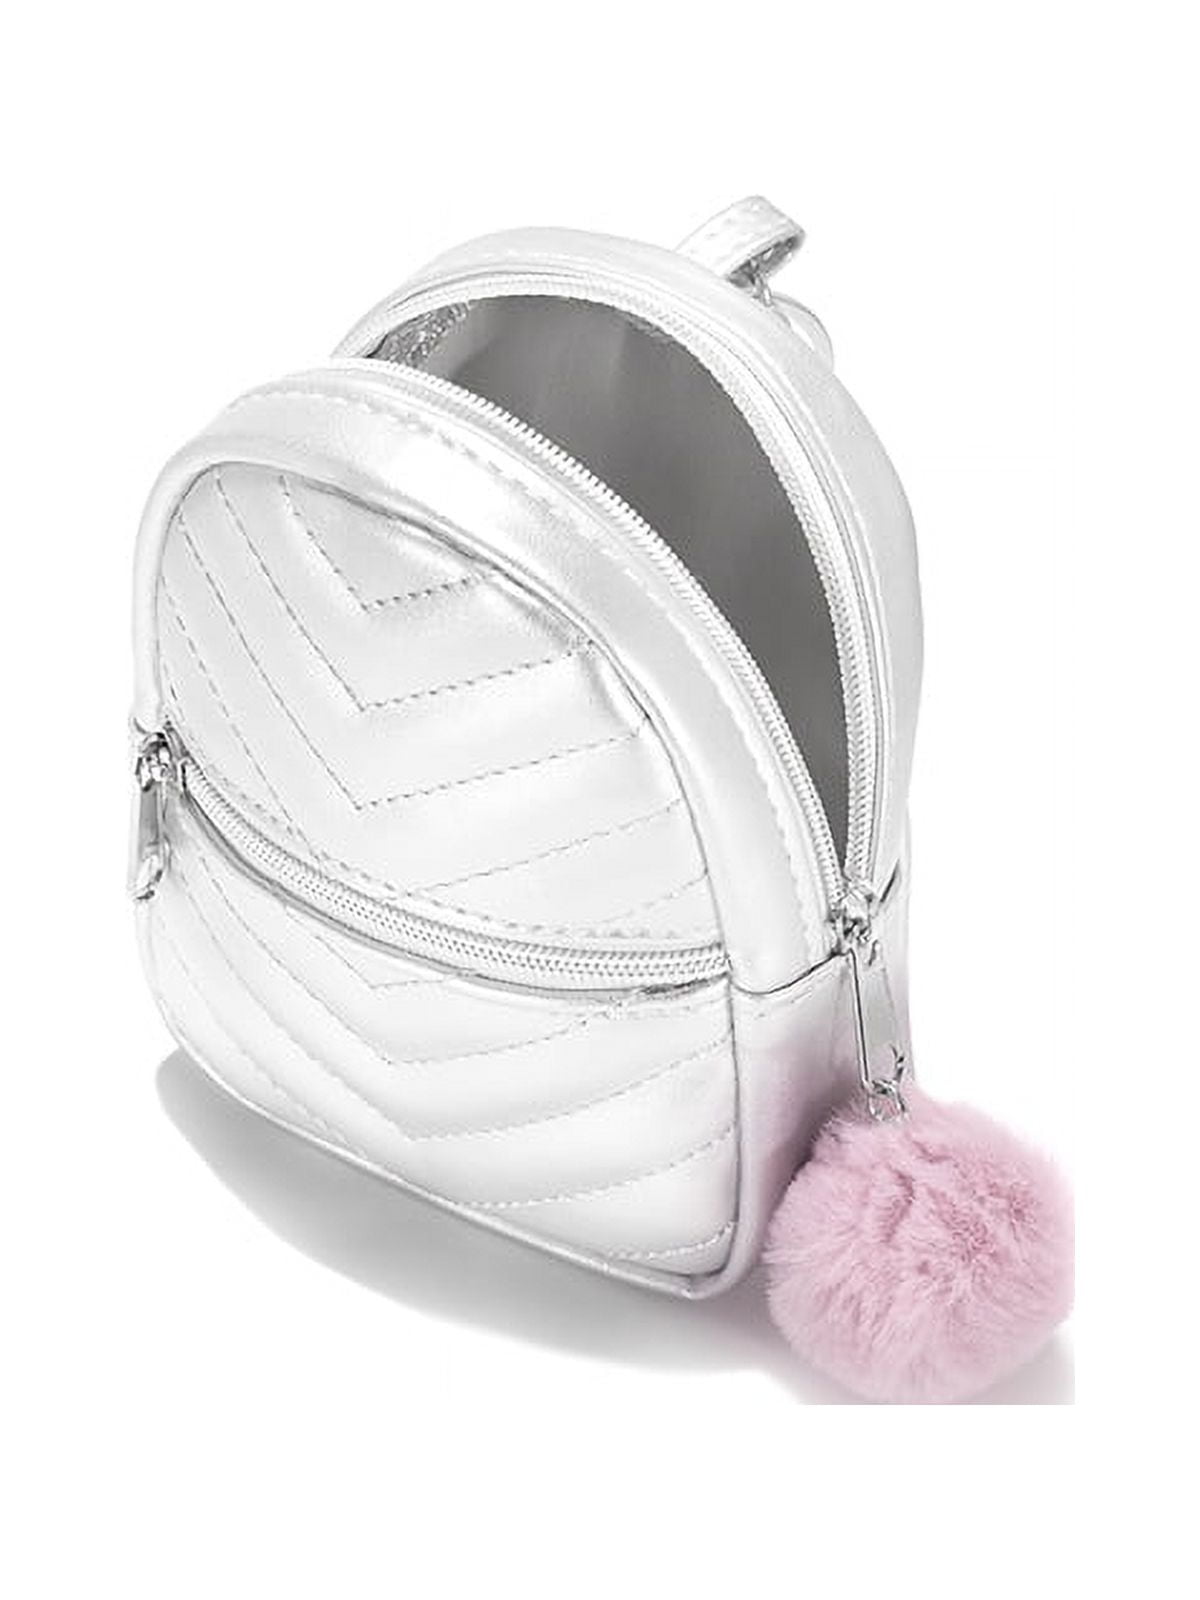 Claire’s Claire's Girls Fuzzy Unicorn Mini Backpack Keychain, Cute Gift, 74637, Girl's, Size: One Size